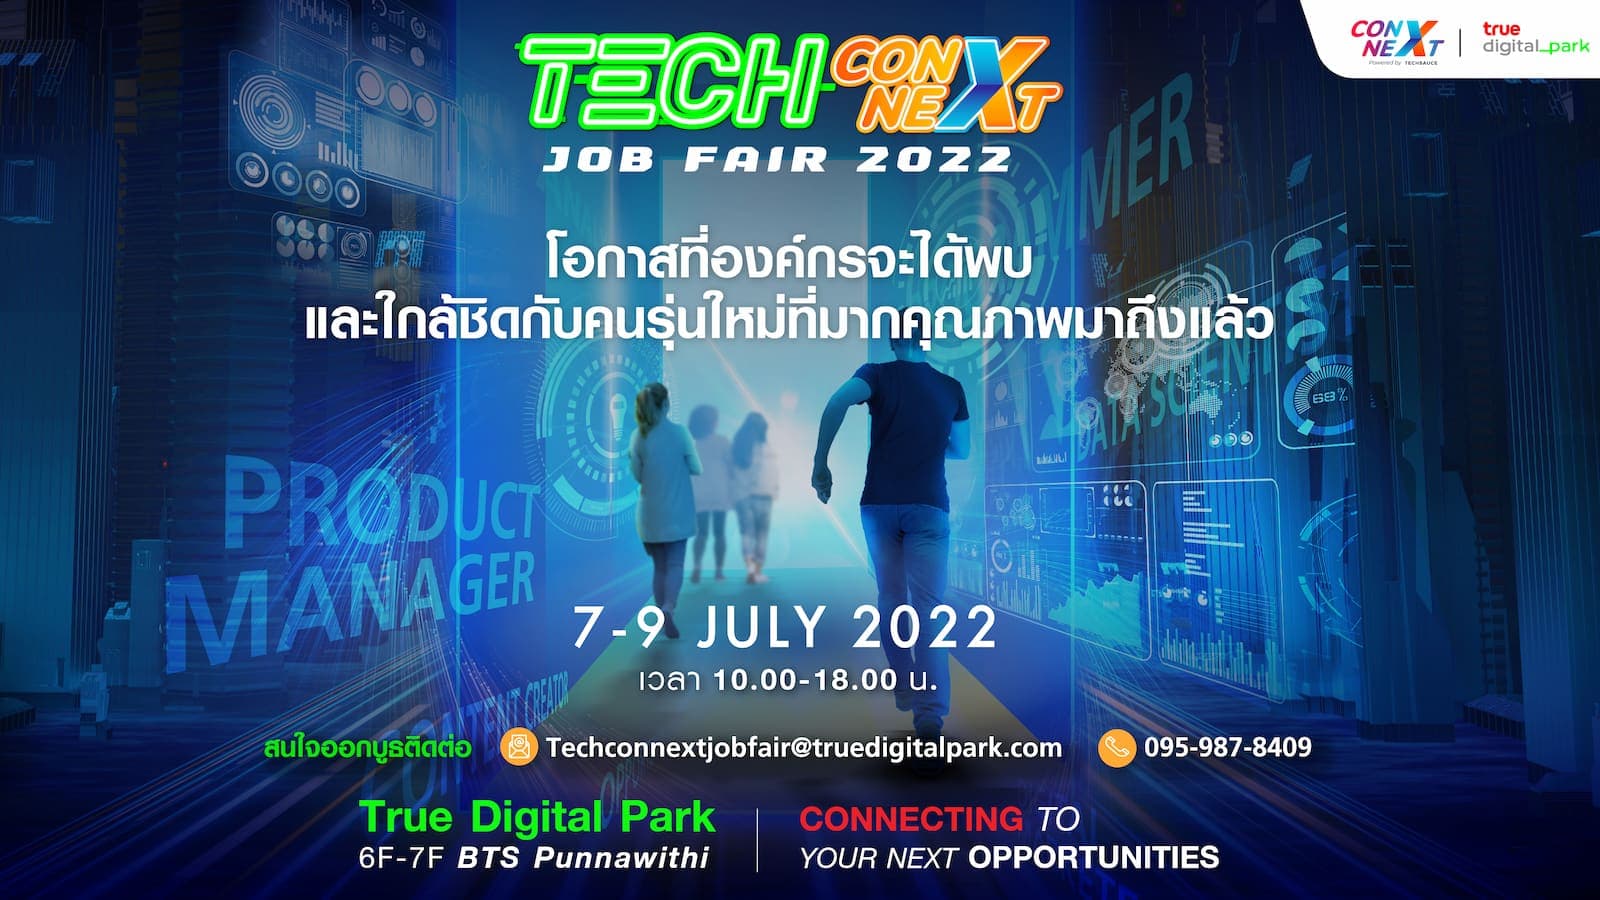 Find the right tech talents for your team at TECH CONNEXT JOB FAIR 2022